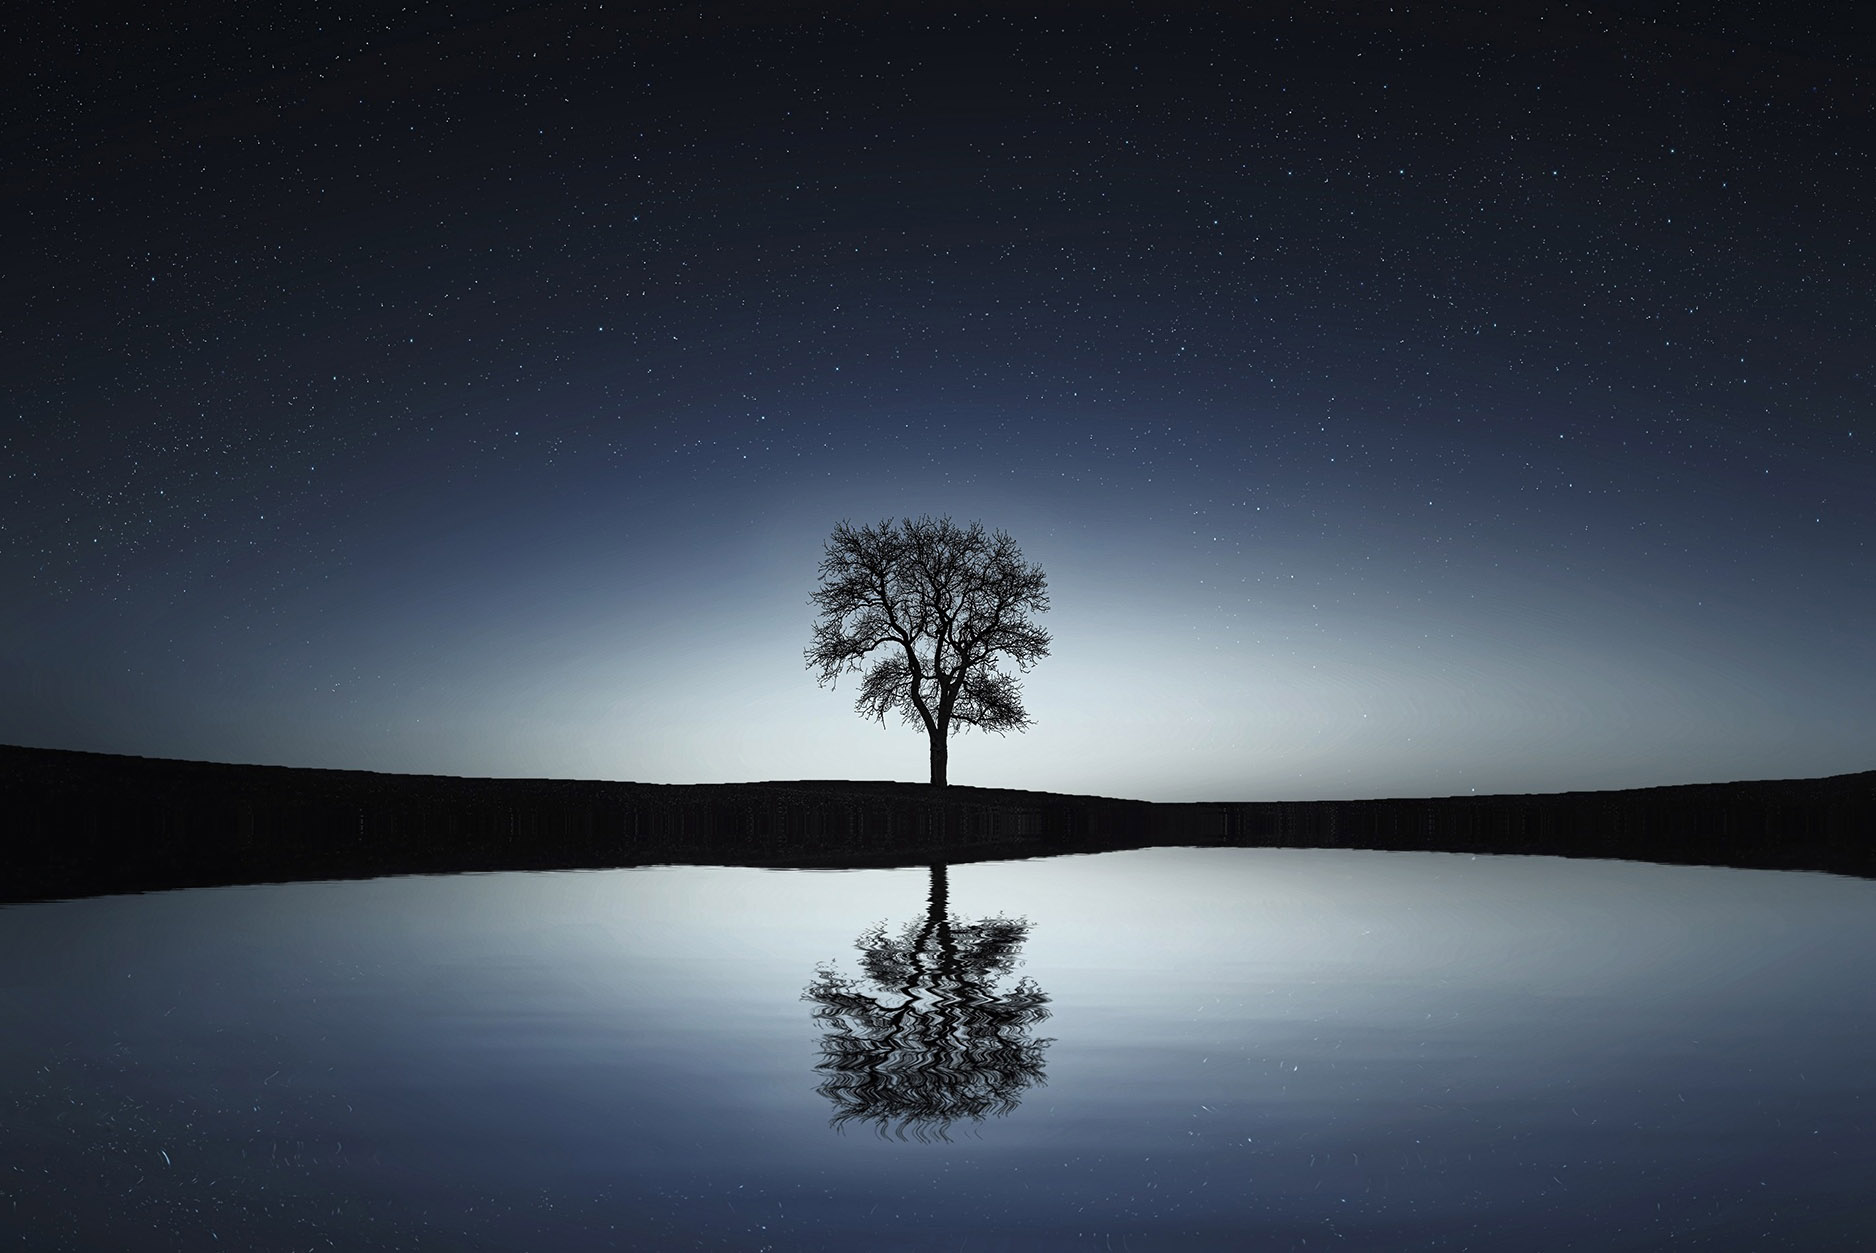 Tree reflected in water (Pixabay/Bessi)